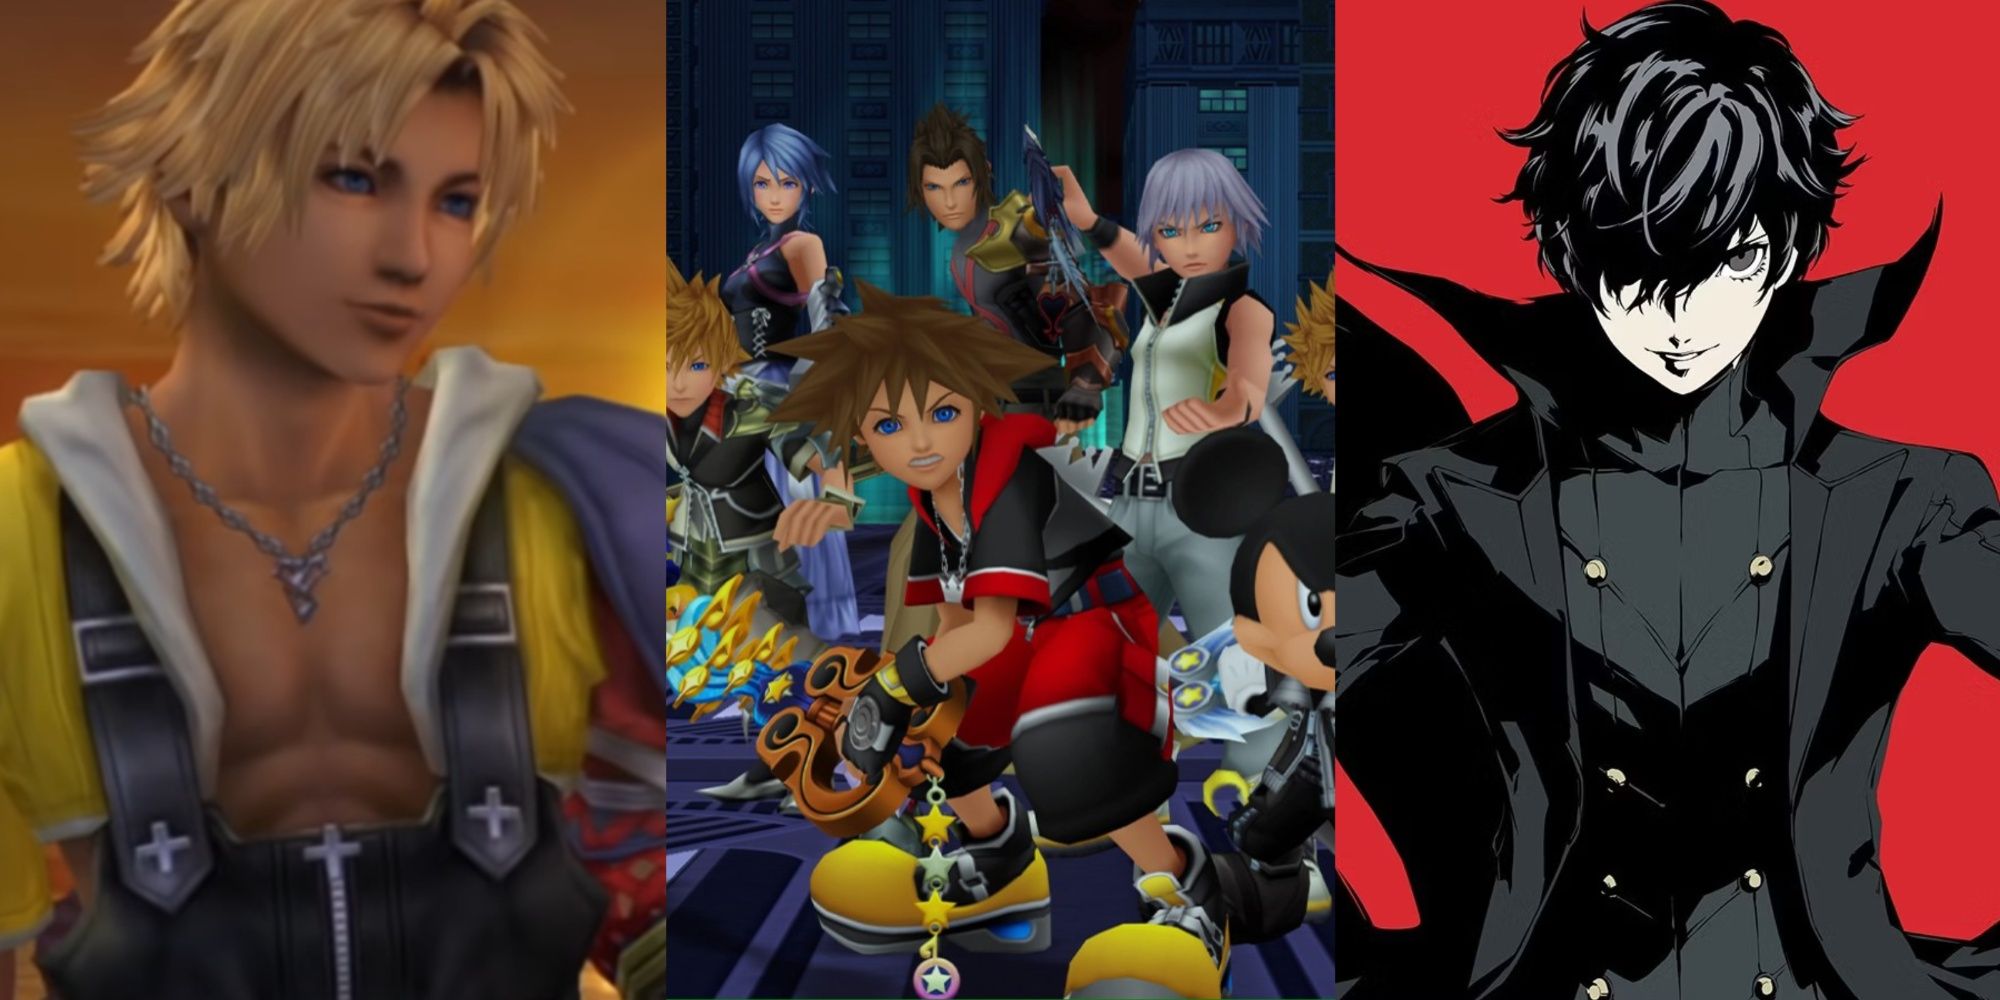 Tidus Final Fantasy 10, Sora and his friends in Kingdom Hearts, and Joker from Persona 5